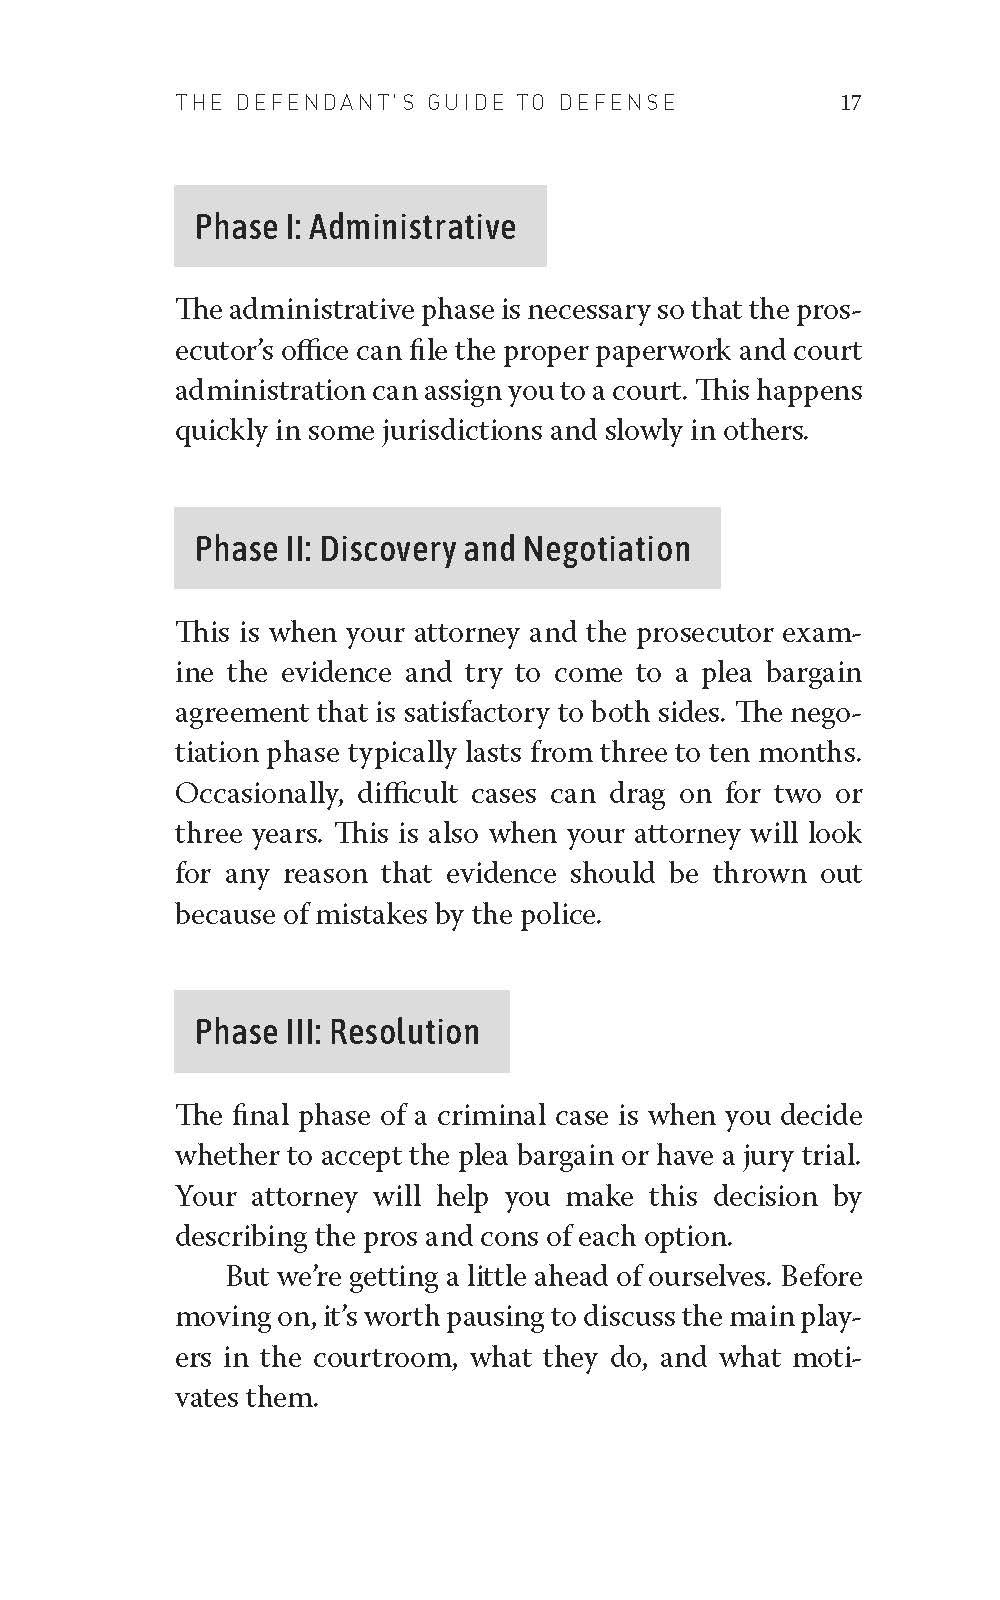 Sample_of_Defendant_s_Guide_to_Defense_Page_20.jpg